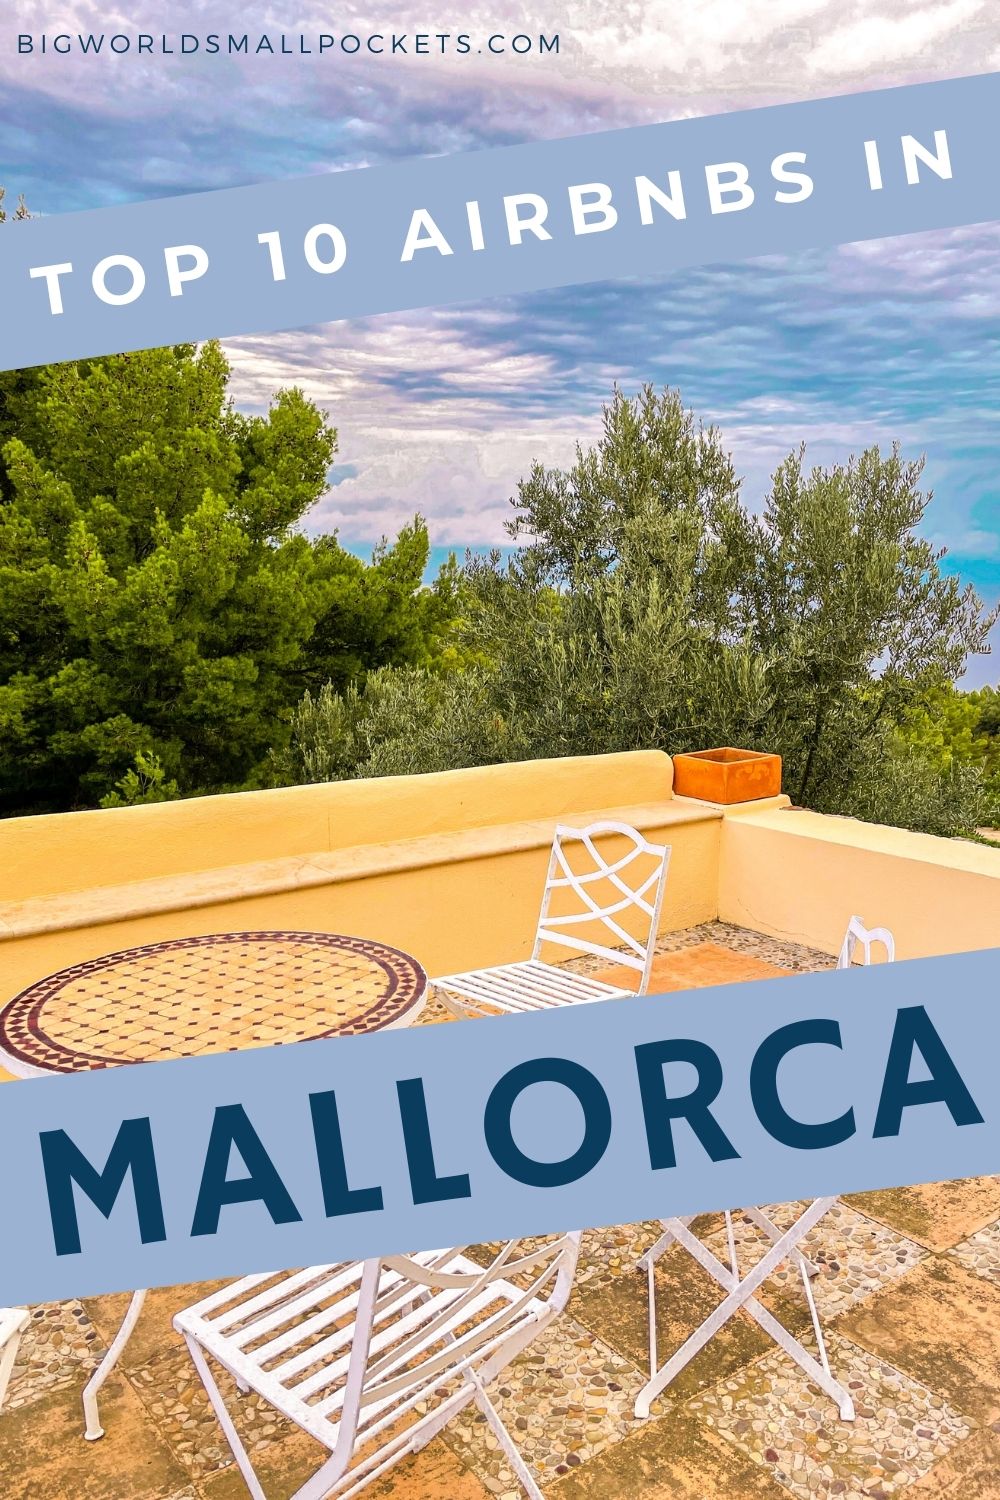 10 Best Airbnb's in Mallorca, Spain